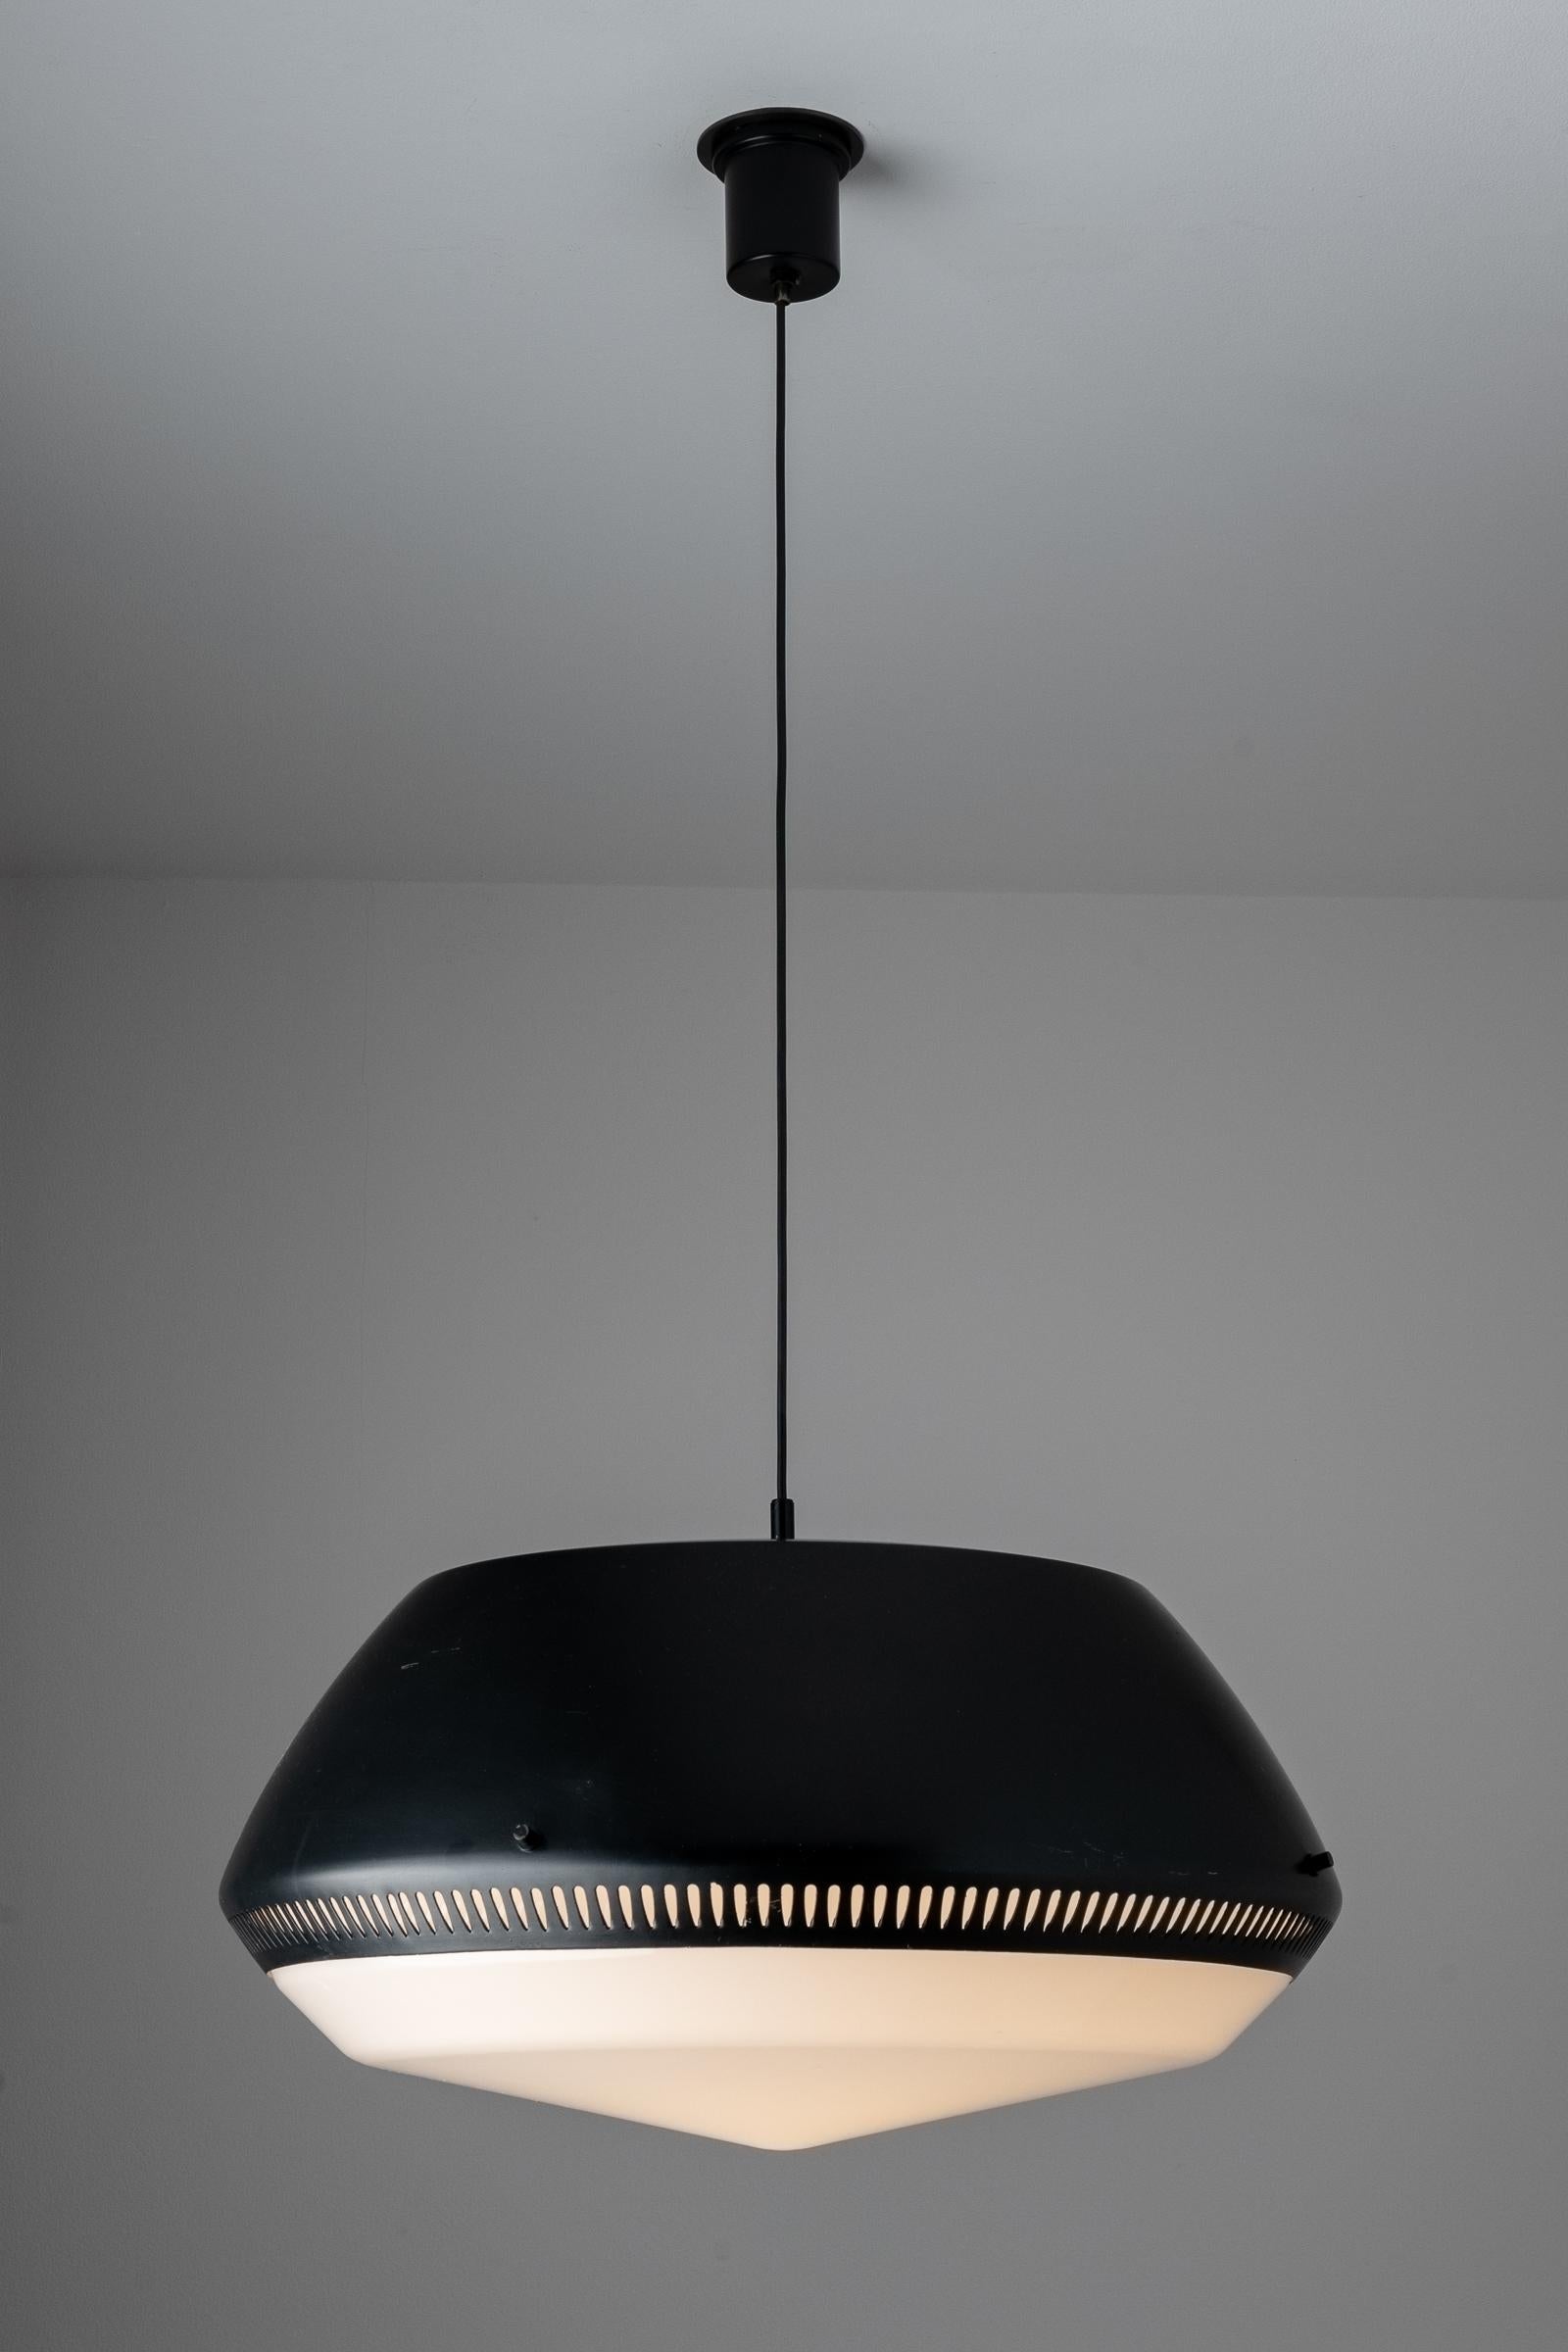 Large Pendant by Greco. Manufactured in Italy, circa 1960's. Acrylic, enameled metal. Custom backplate, original canopy. Wired for U.S. standards. We recommend one E27 60w maximum bulb. Bulb not included. height displayed is OAH.